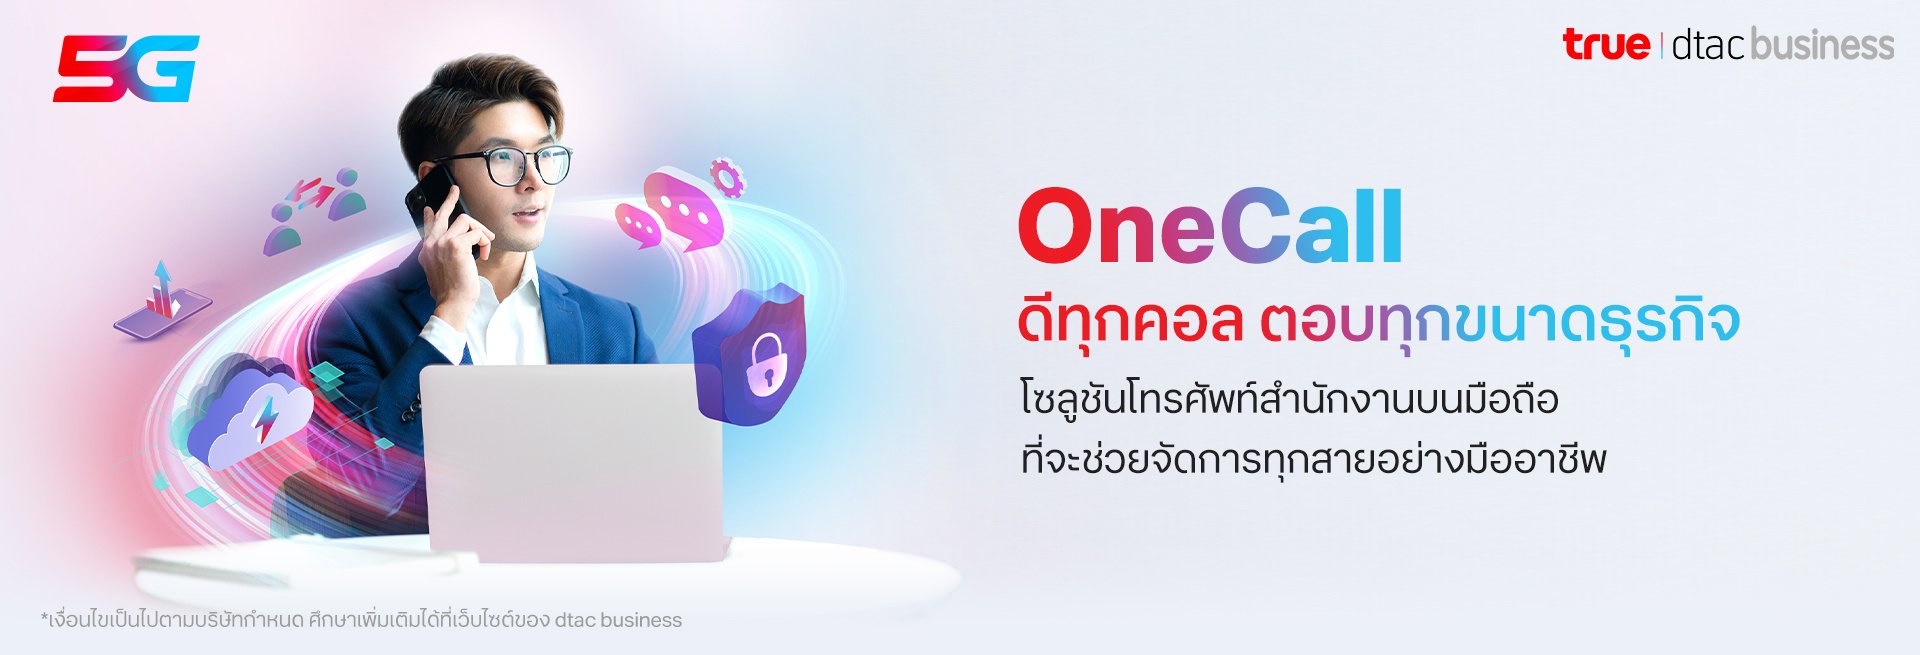 dtac One Call